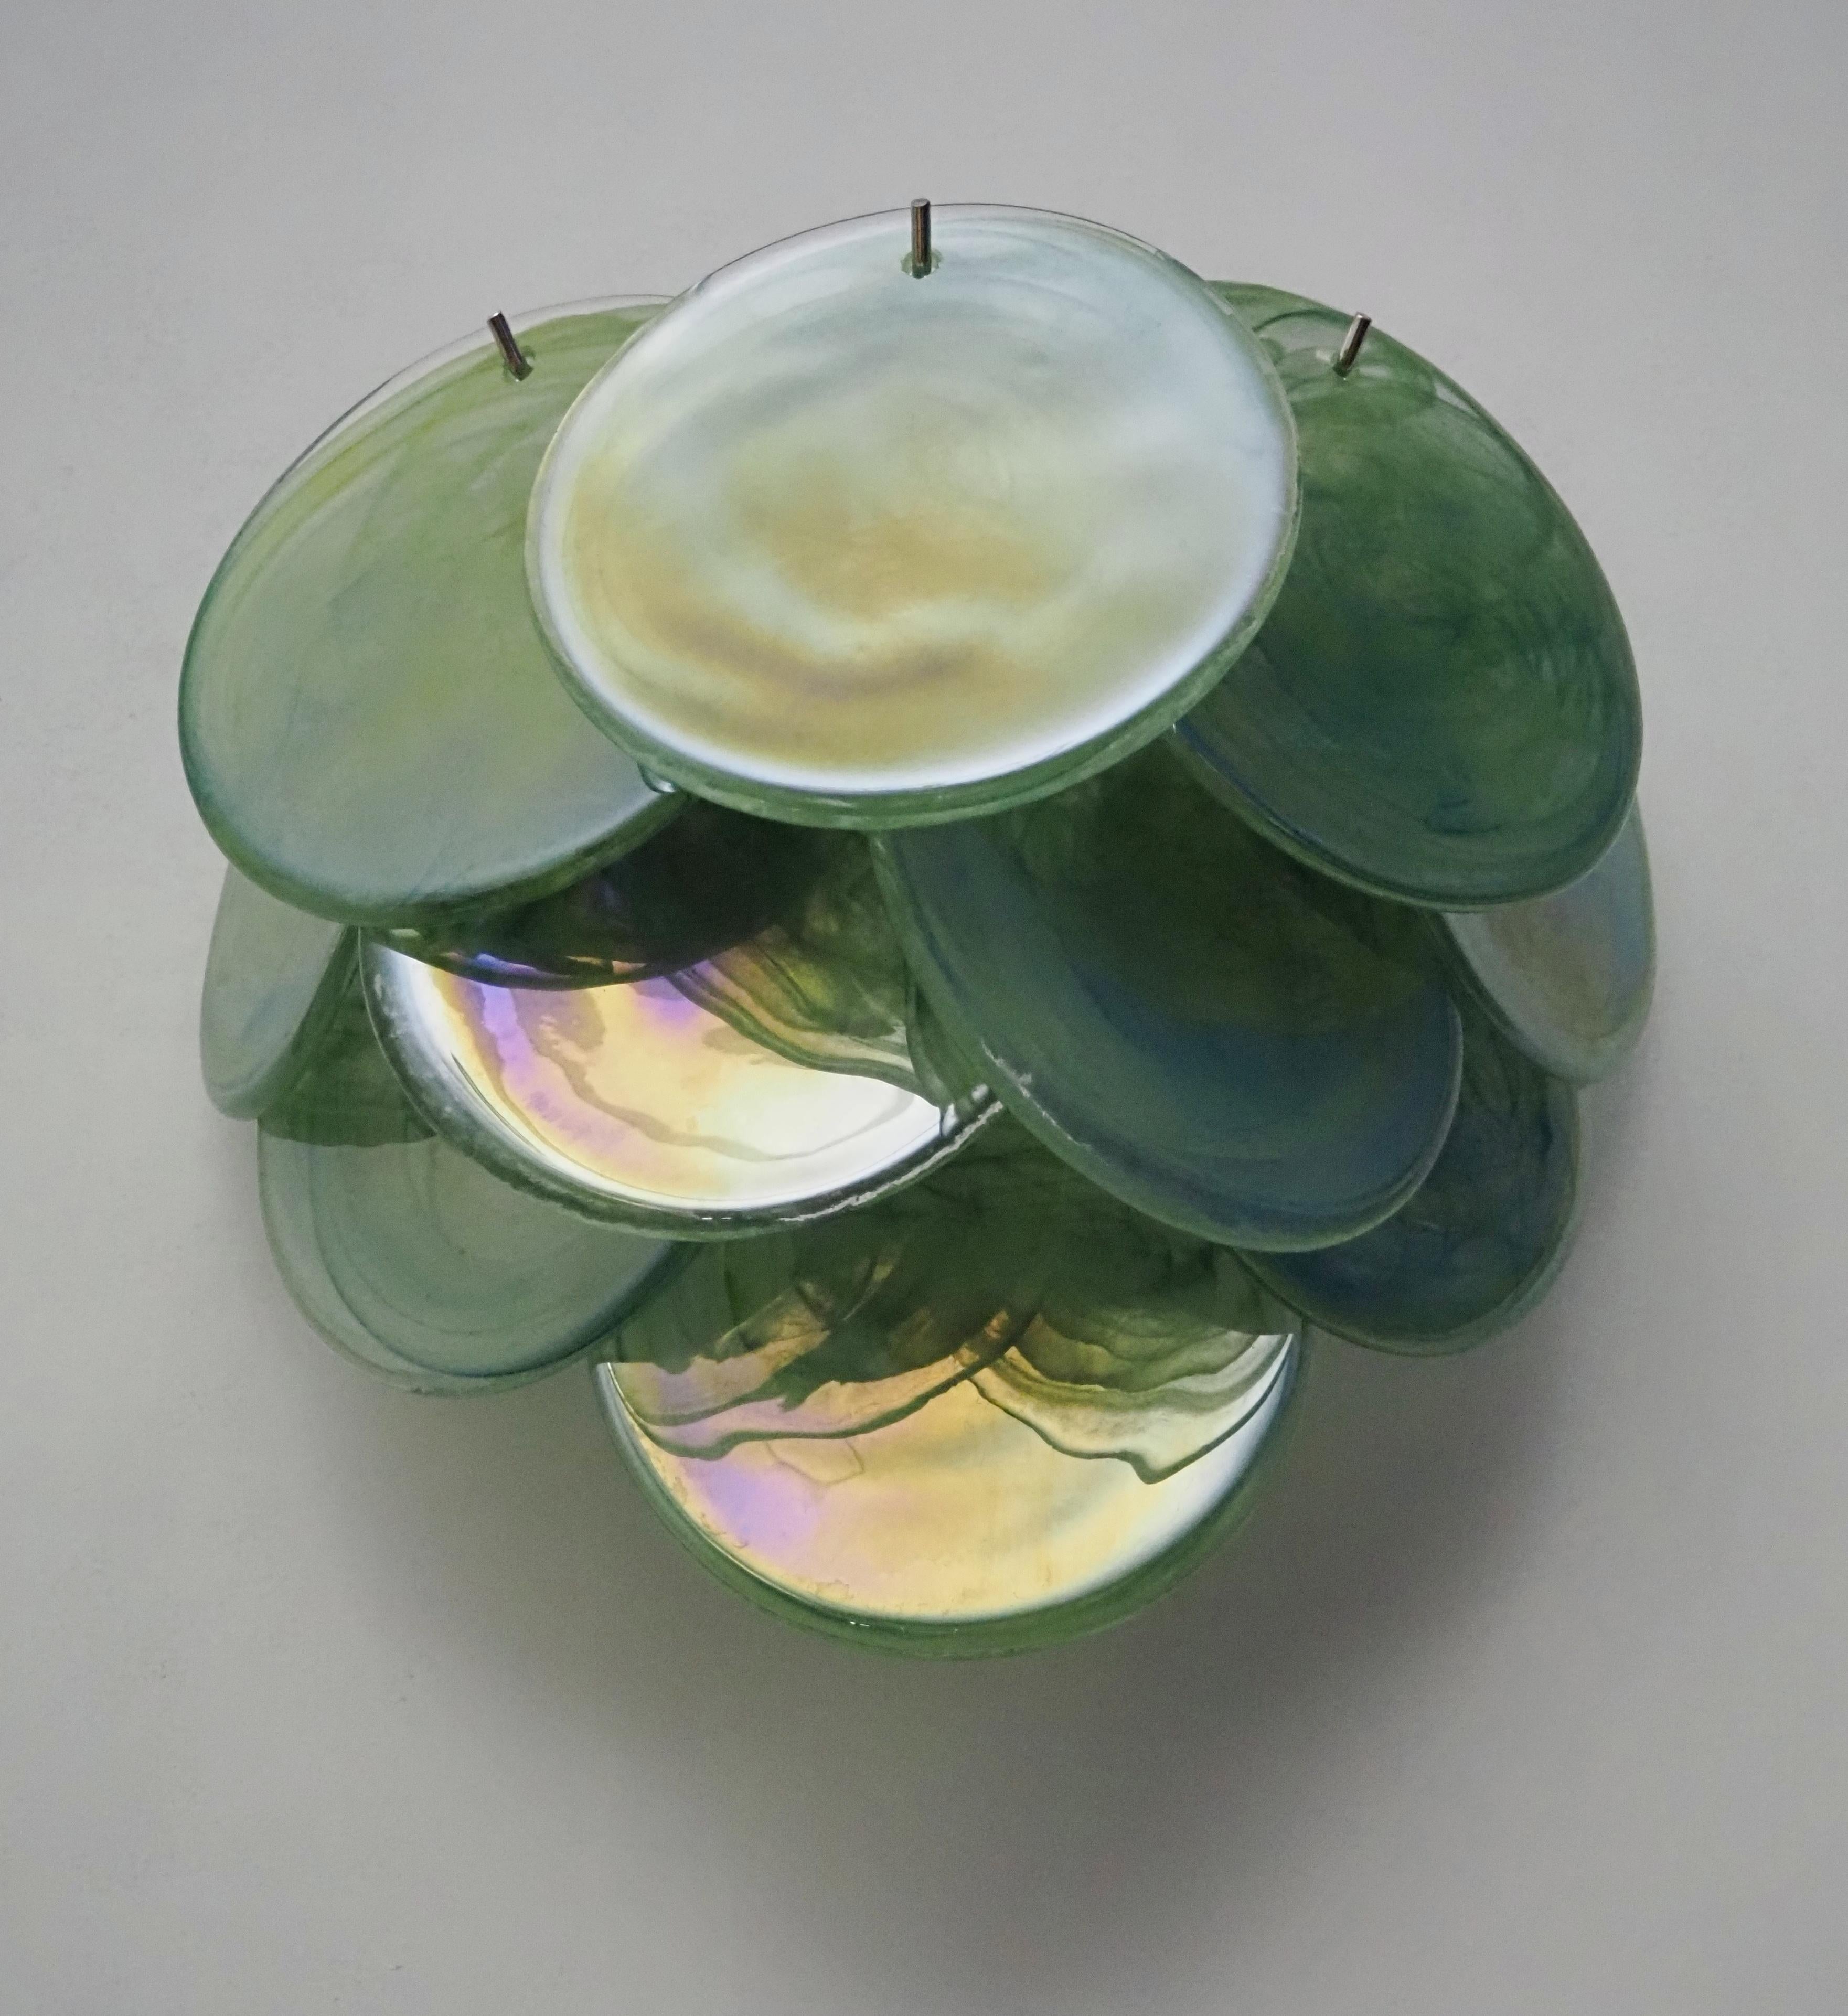 20th Century Pair of Glass Wall Sconces - 10 Iridescent Alabaster Green Discs